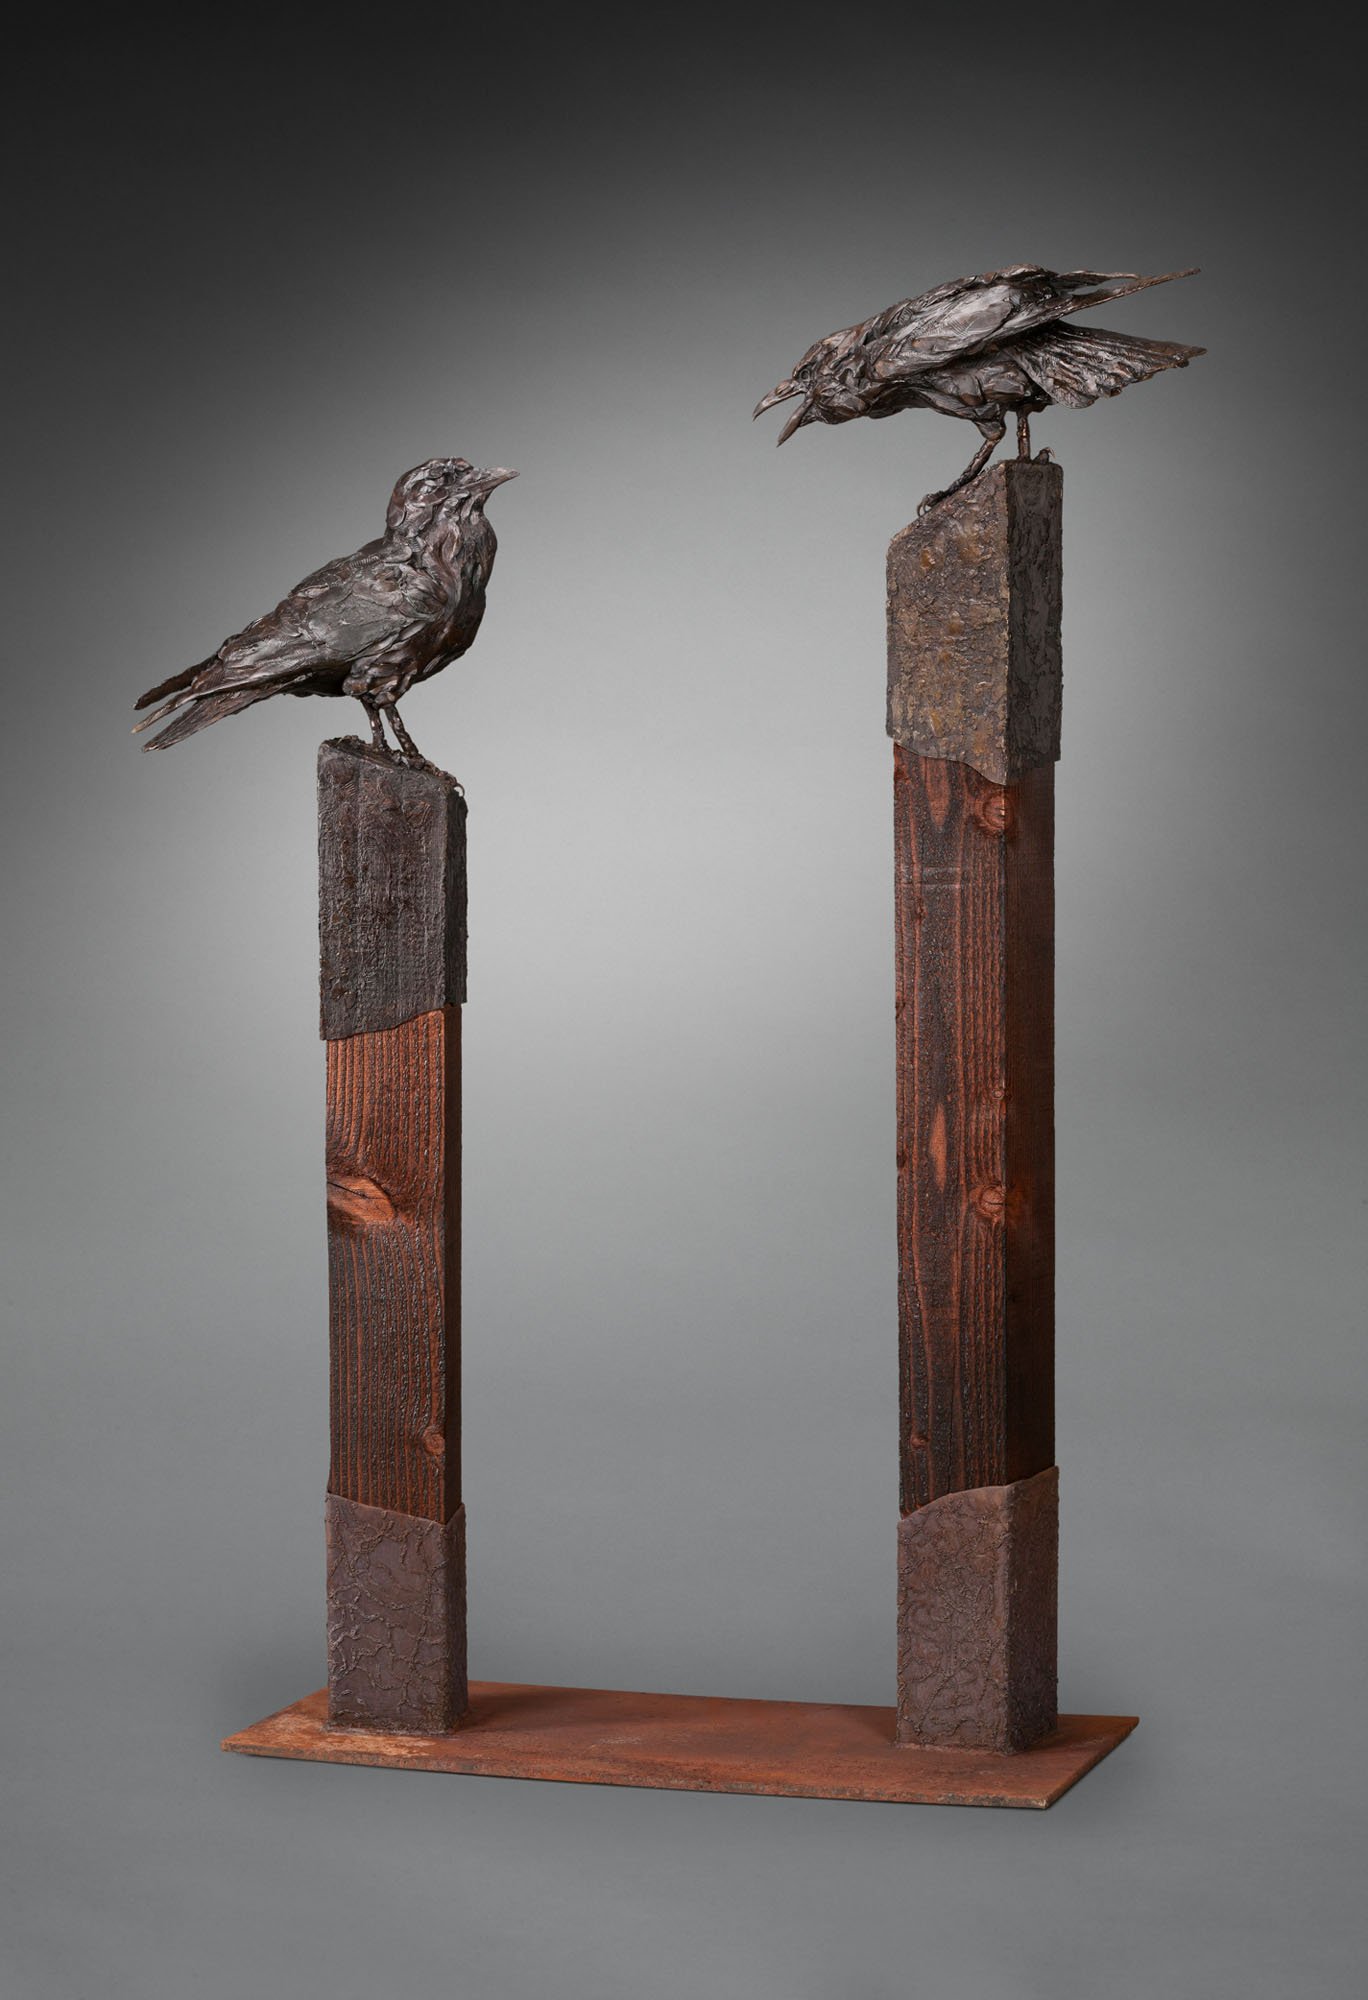 Picture of Paul Rhymer sculpture featuring two tall posts, each with a raven perched on top. The raven on the taller post, at left, is leaning forward toward the second across from it, with its beak open, as if lecturing the second bird. The second raven, at right, on the slightly shorter post is looking at the first bird calling at it.